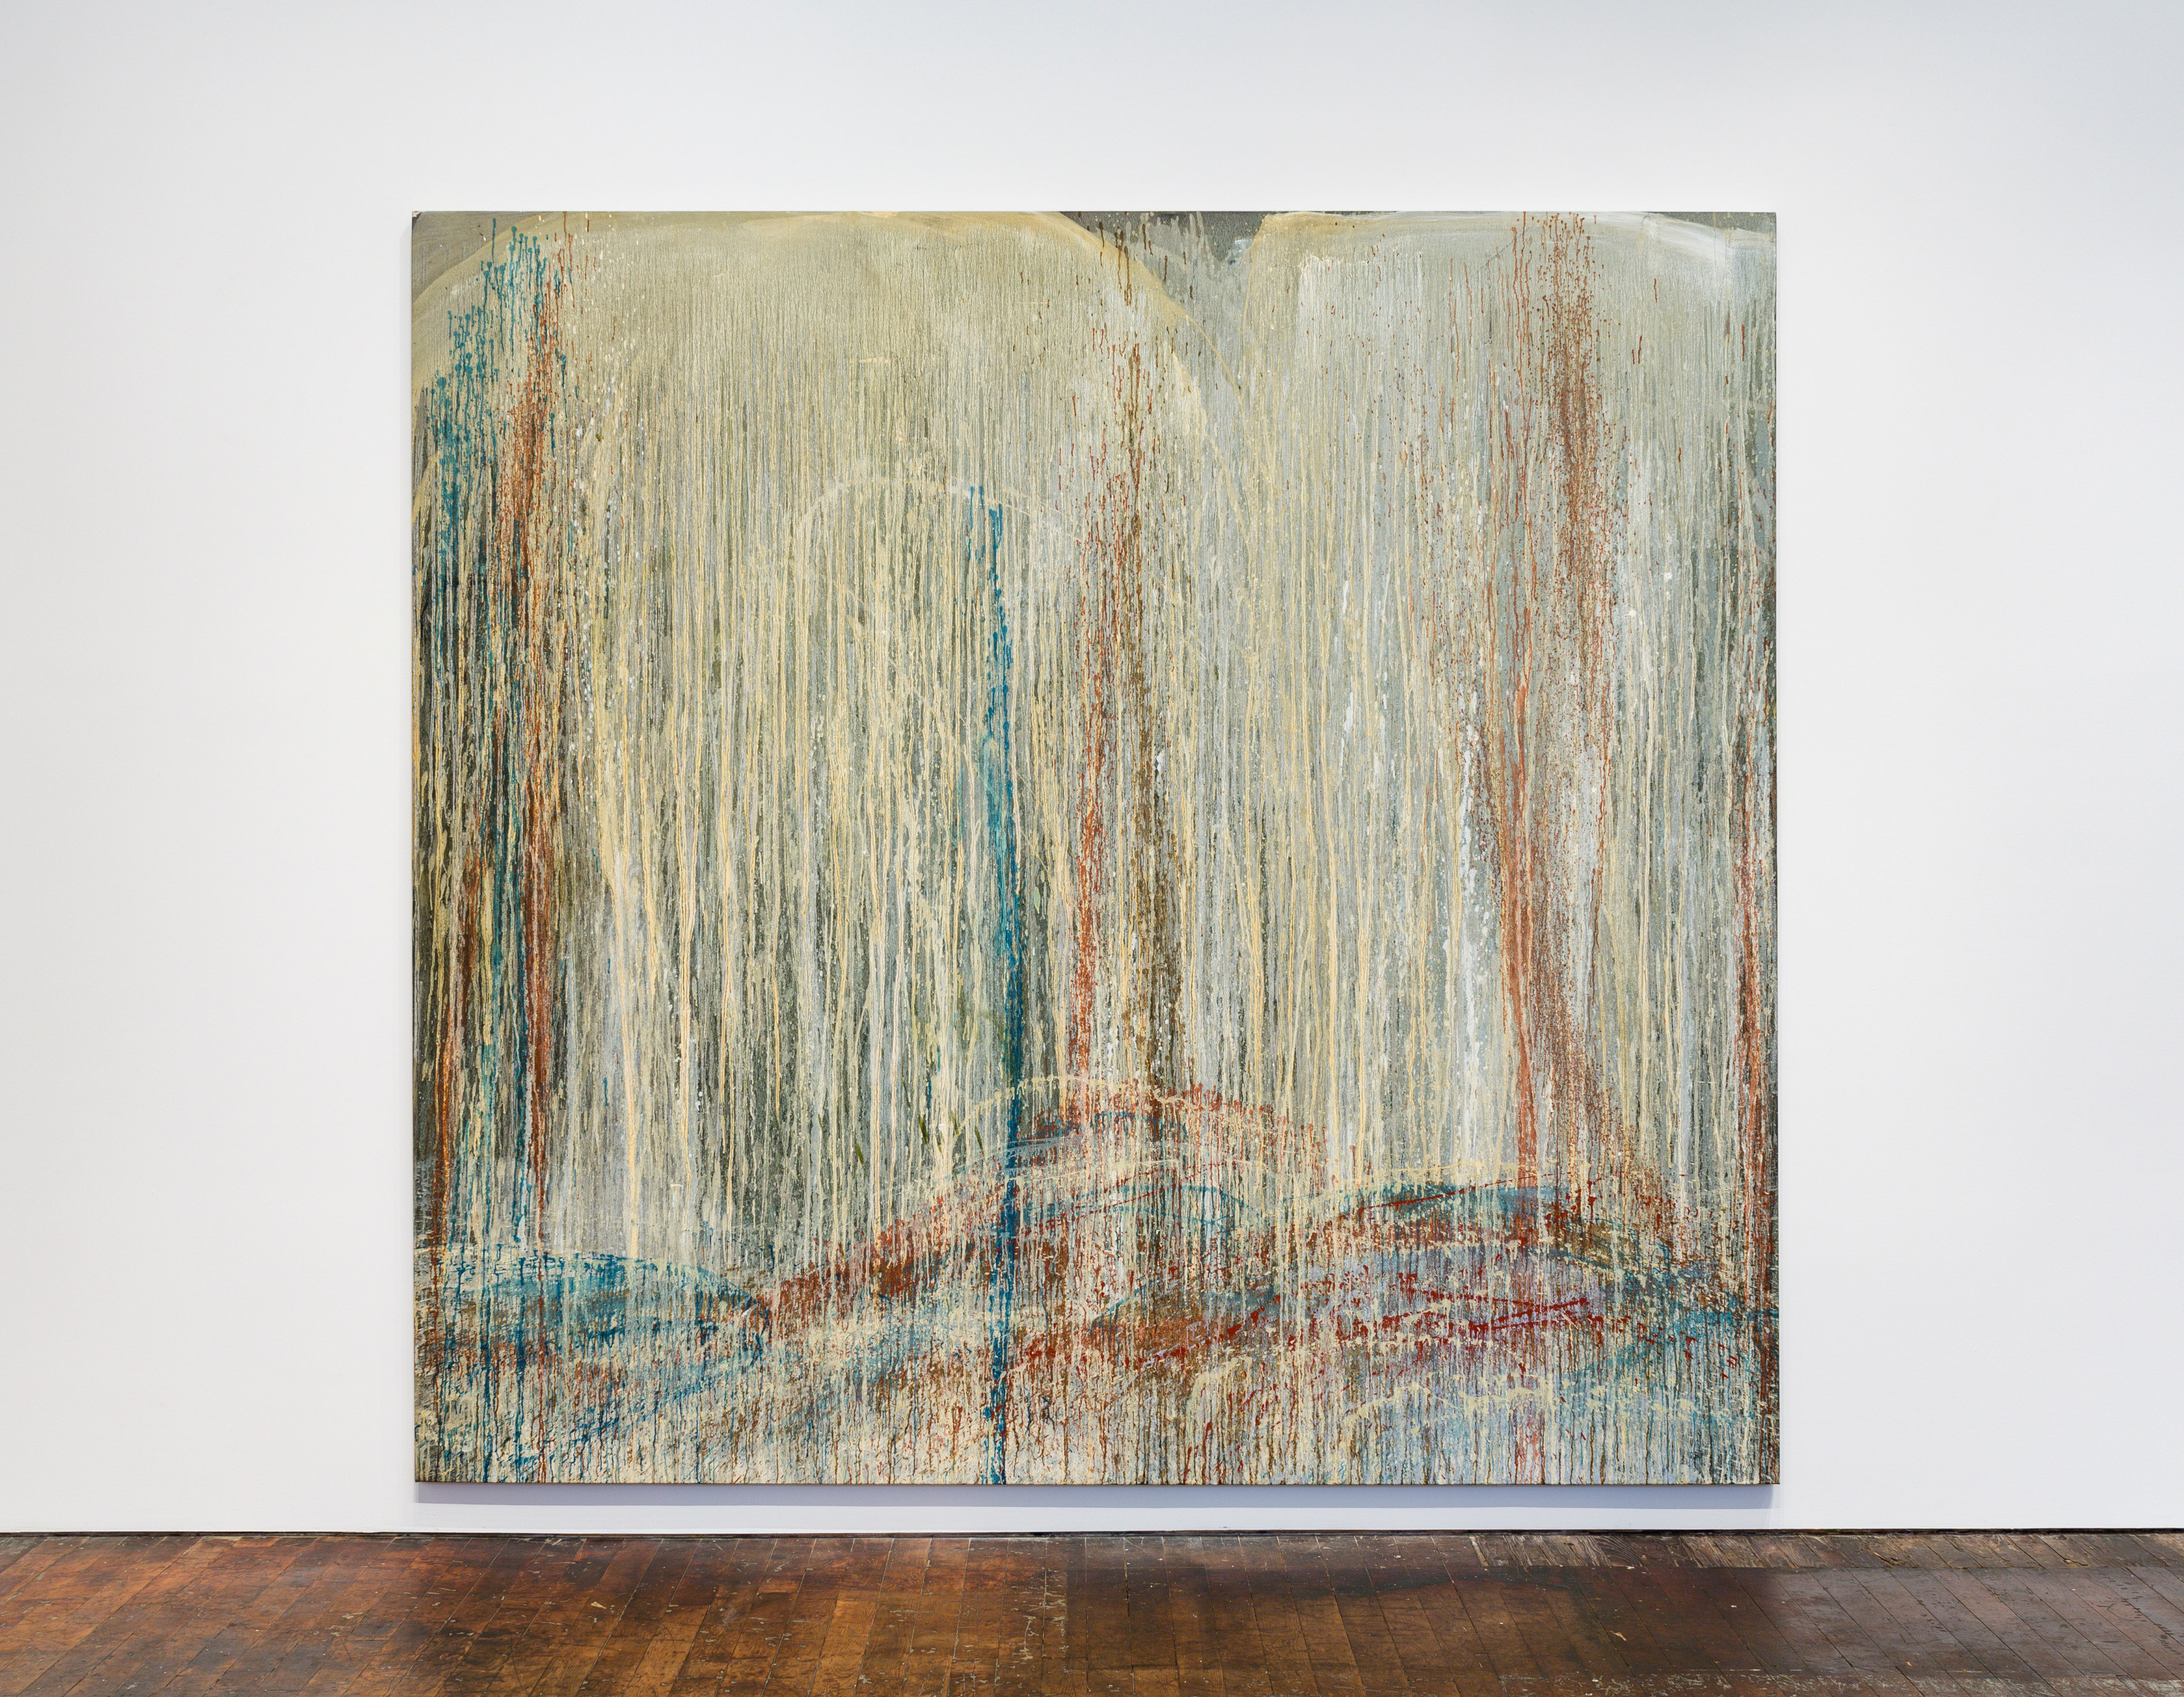 Pat Steir Red, Blue and Silver Waterfall